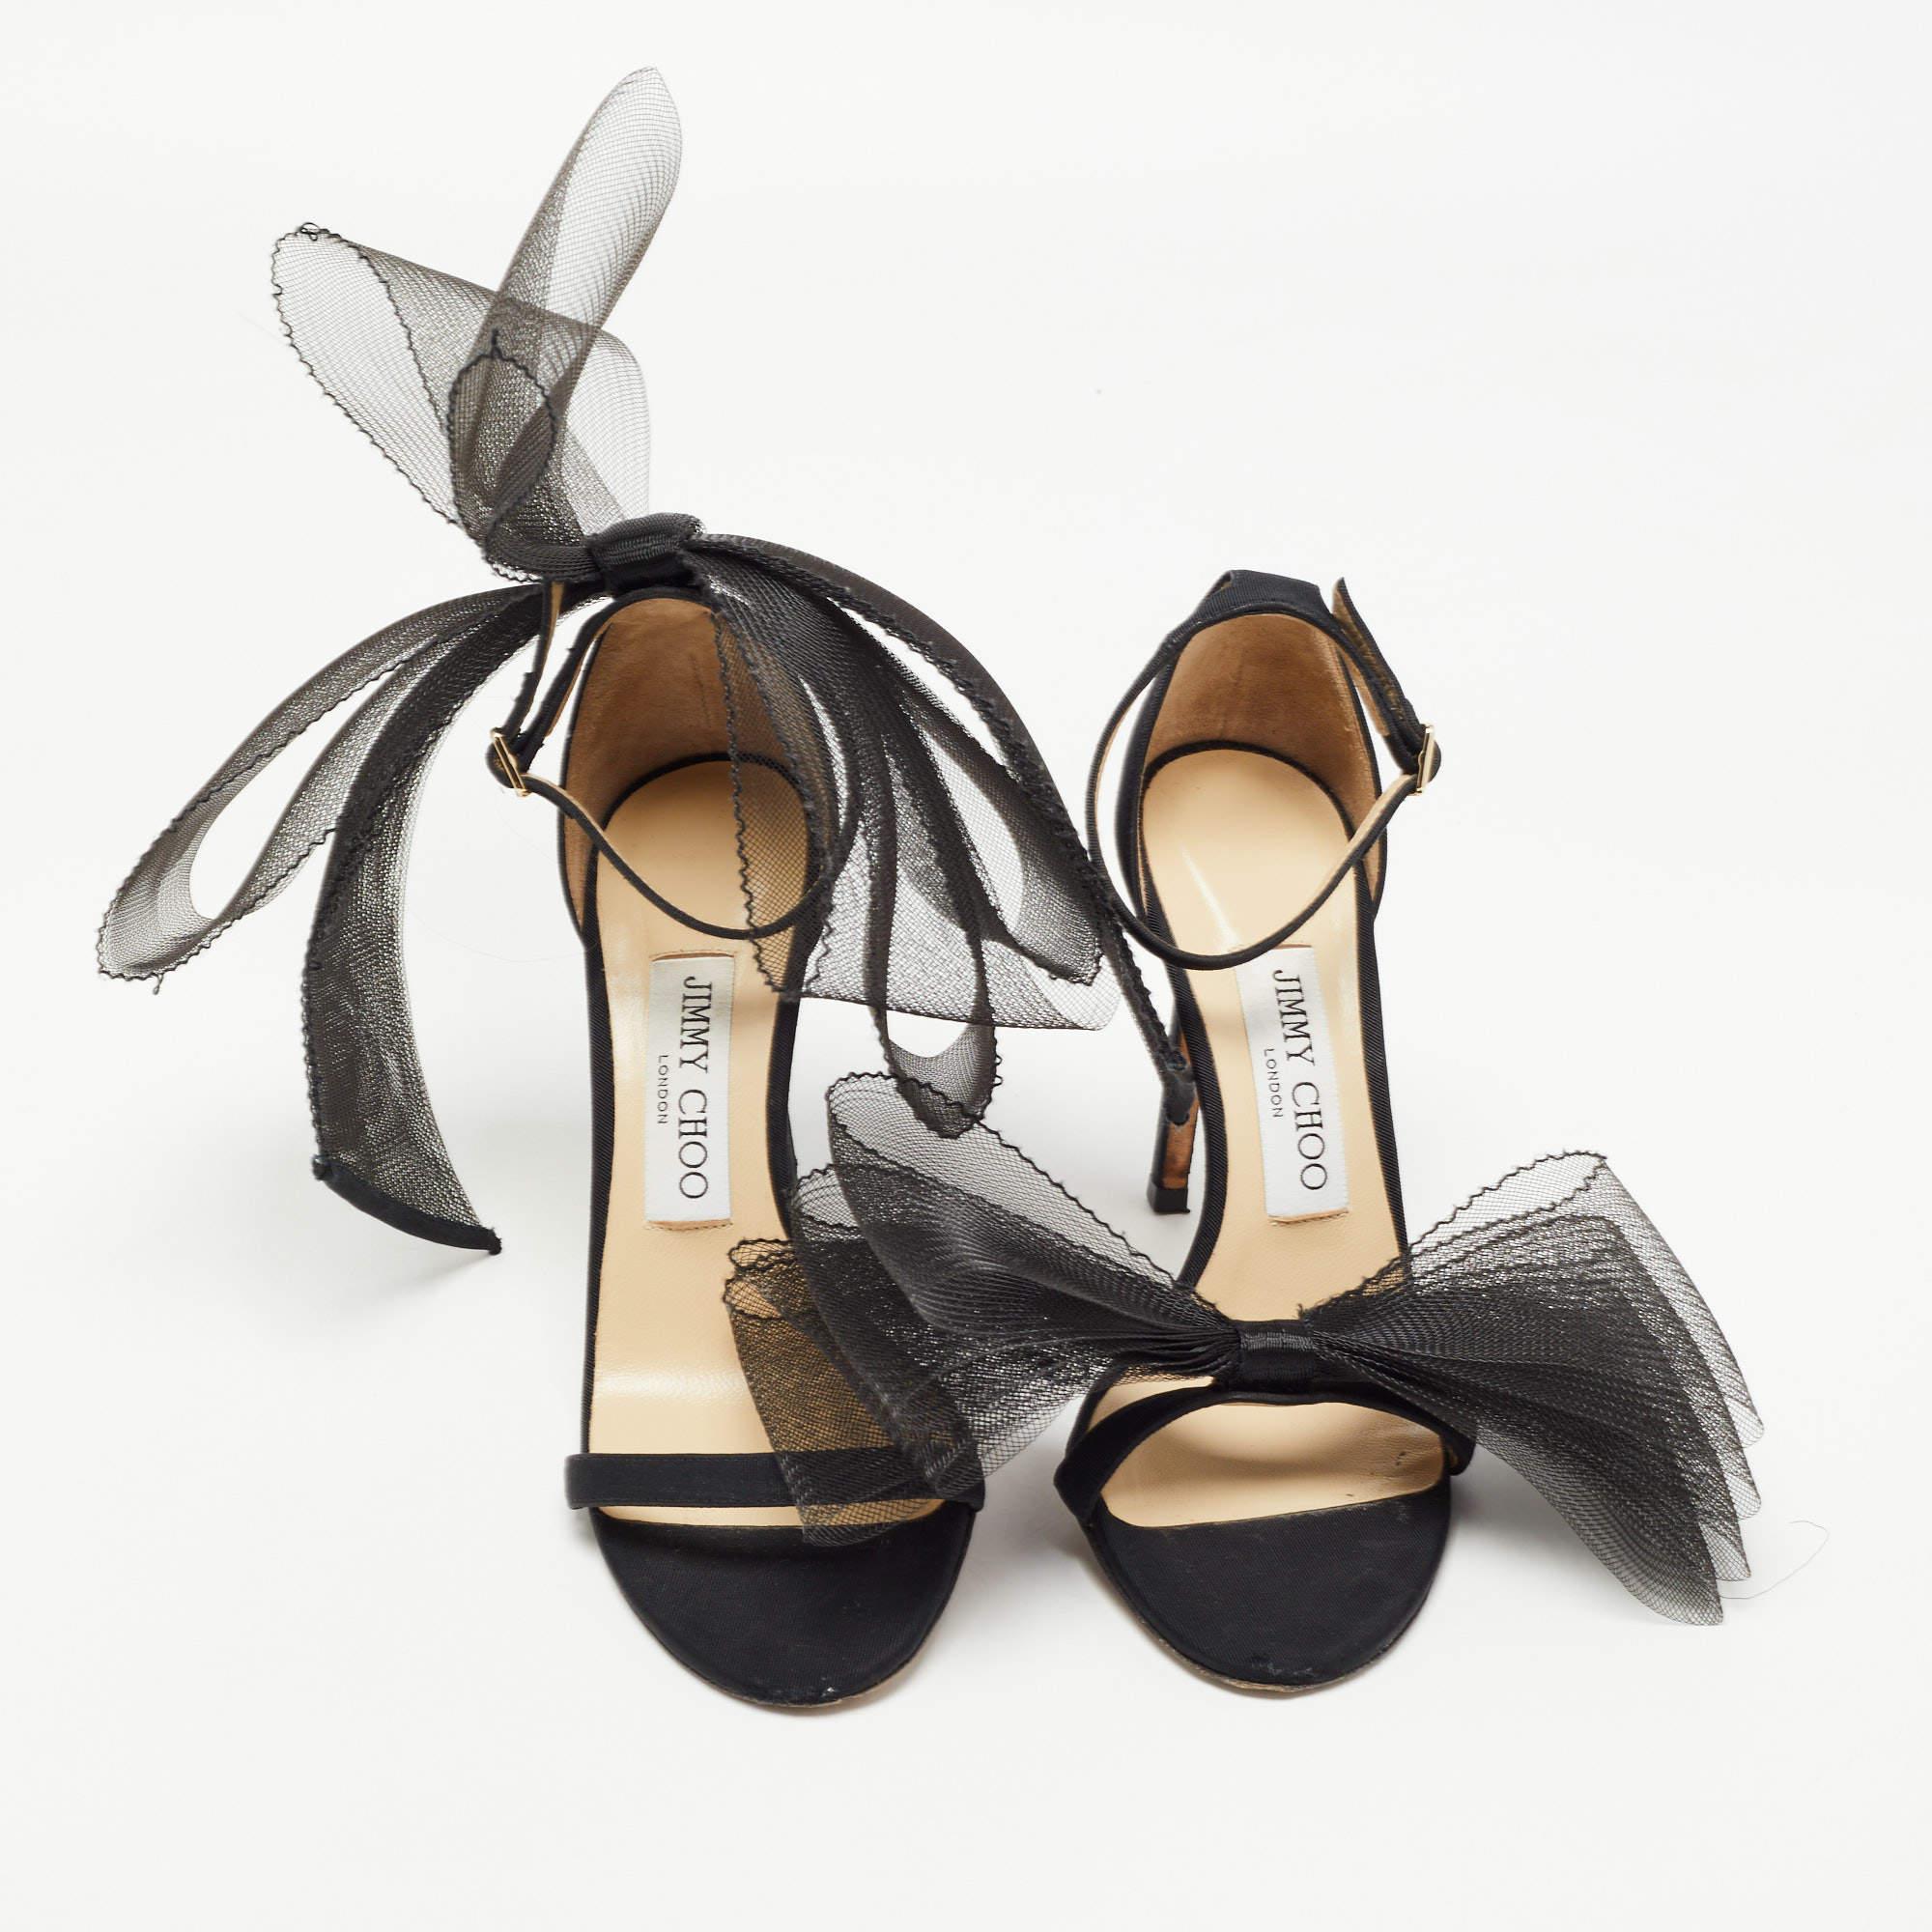 Festooned with mesh bows and mounted on slim heels, these Aveline sandals from Jimmy Choo will add a chic-feminine touch to your look. They are created using black canvas & leather and exhibit open toes, gold-tone hardware, and an ankle